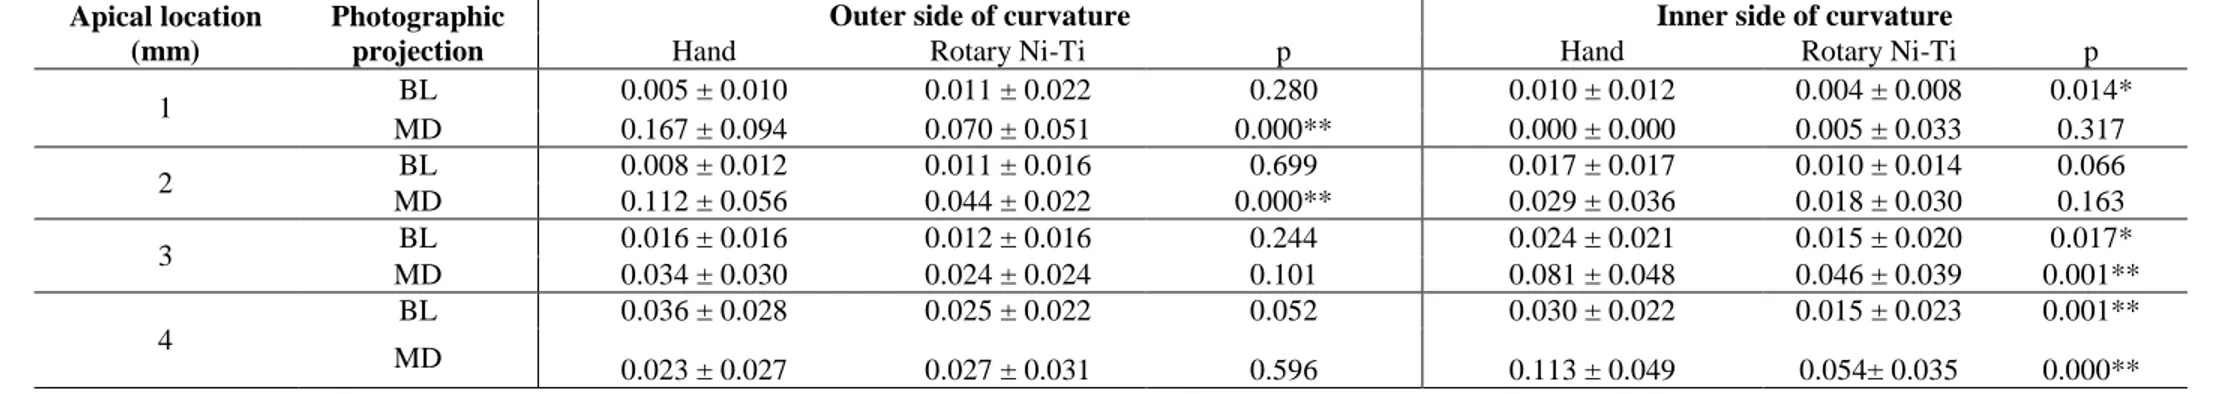 Table 1 - Mean ± standard deviation (mm)  of  apical  transportation  associated with hand and Ni-Ti rotary instrumentation in different sides of the canal curvature and photogra-  phic projections at 1, 2, 3, and 4 mm from the end of the canal 